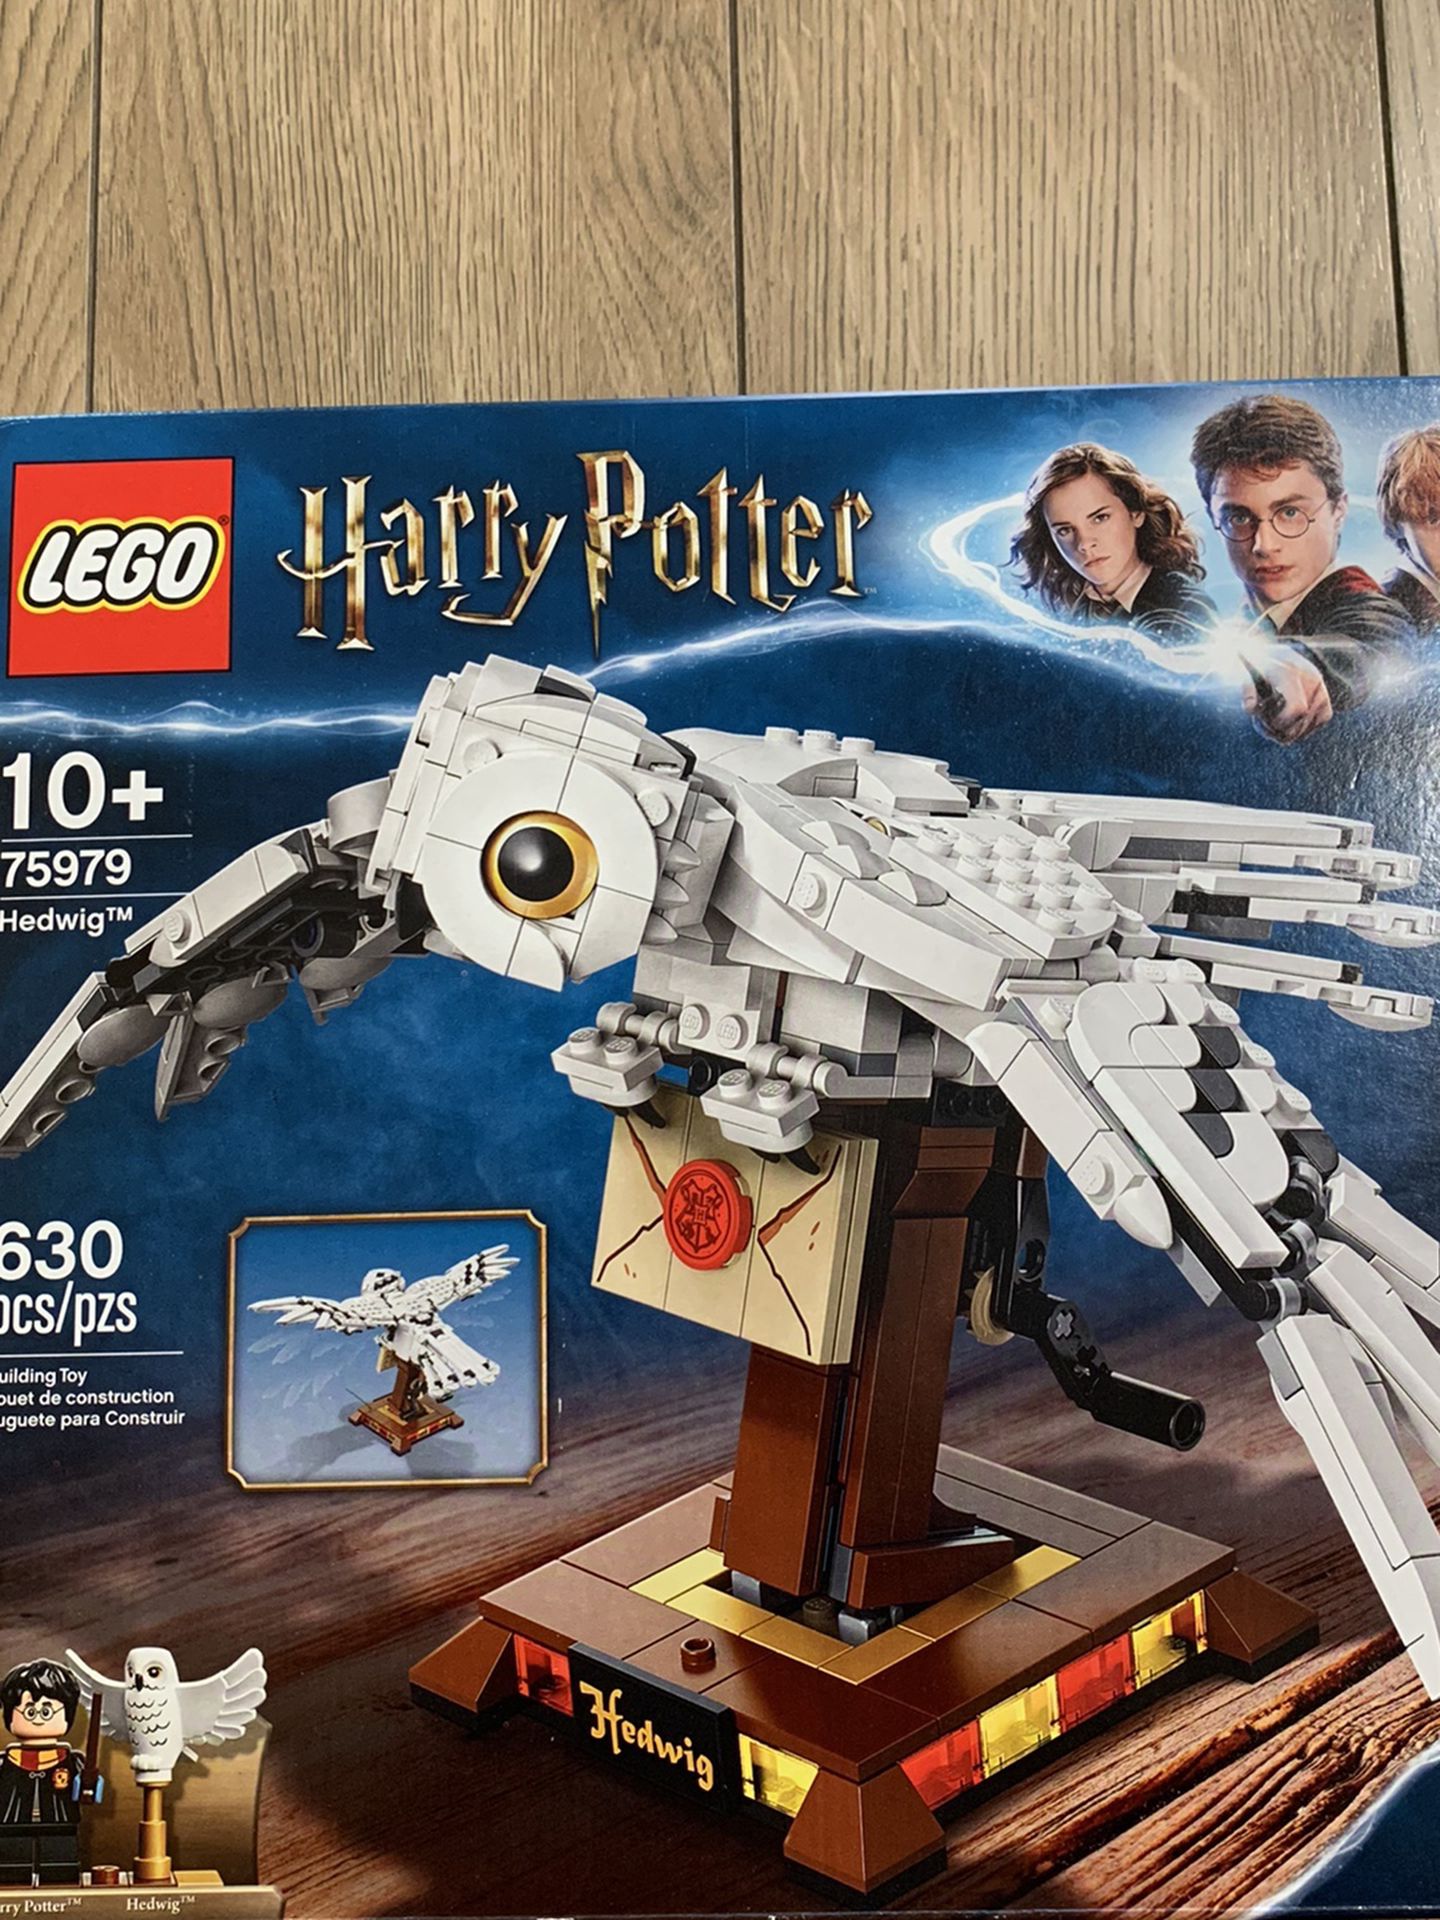 Lego Harry Potter Hedwig 75979 - New